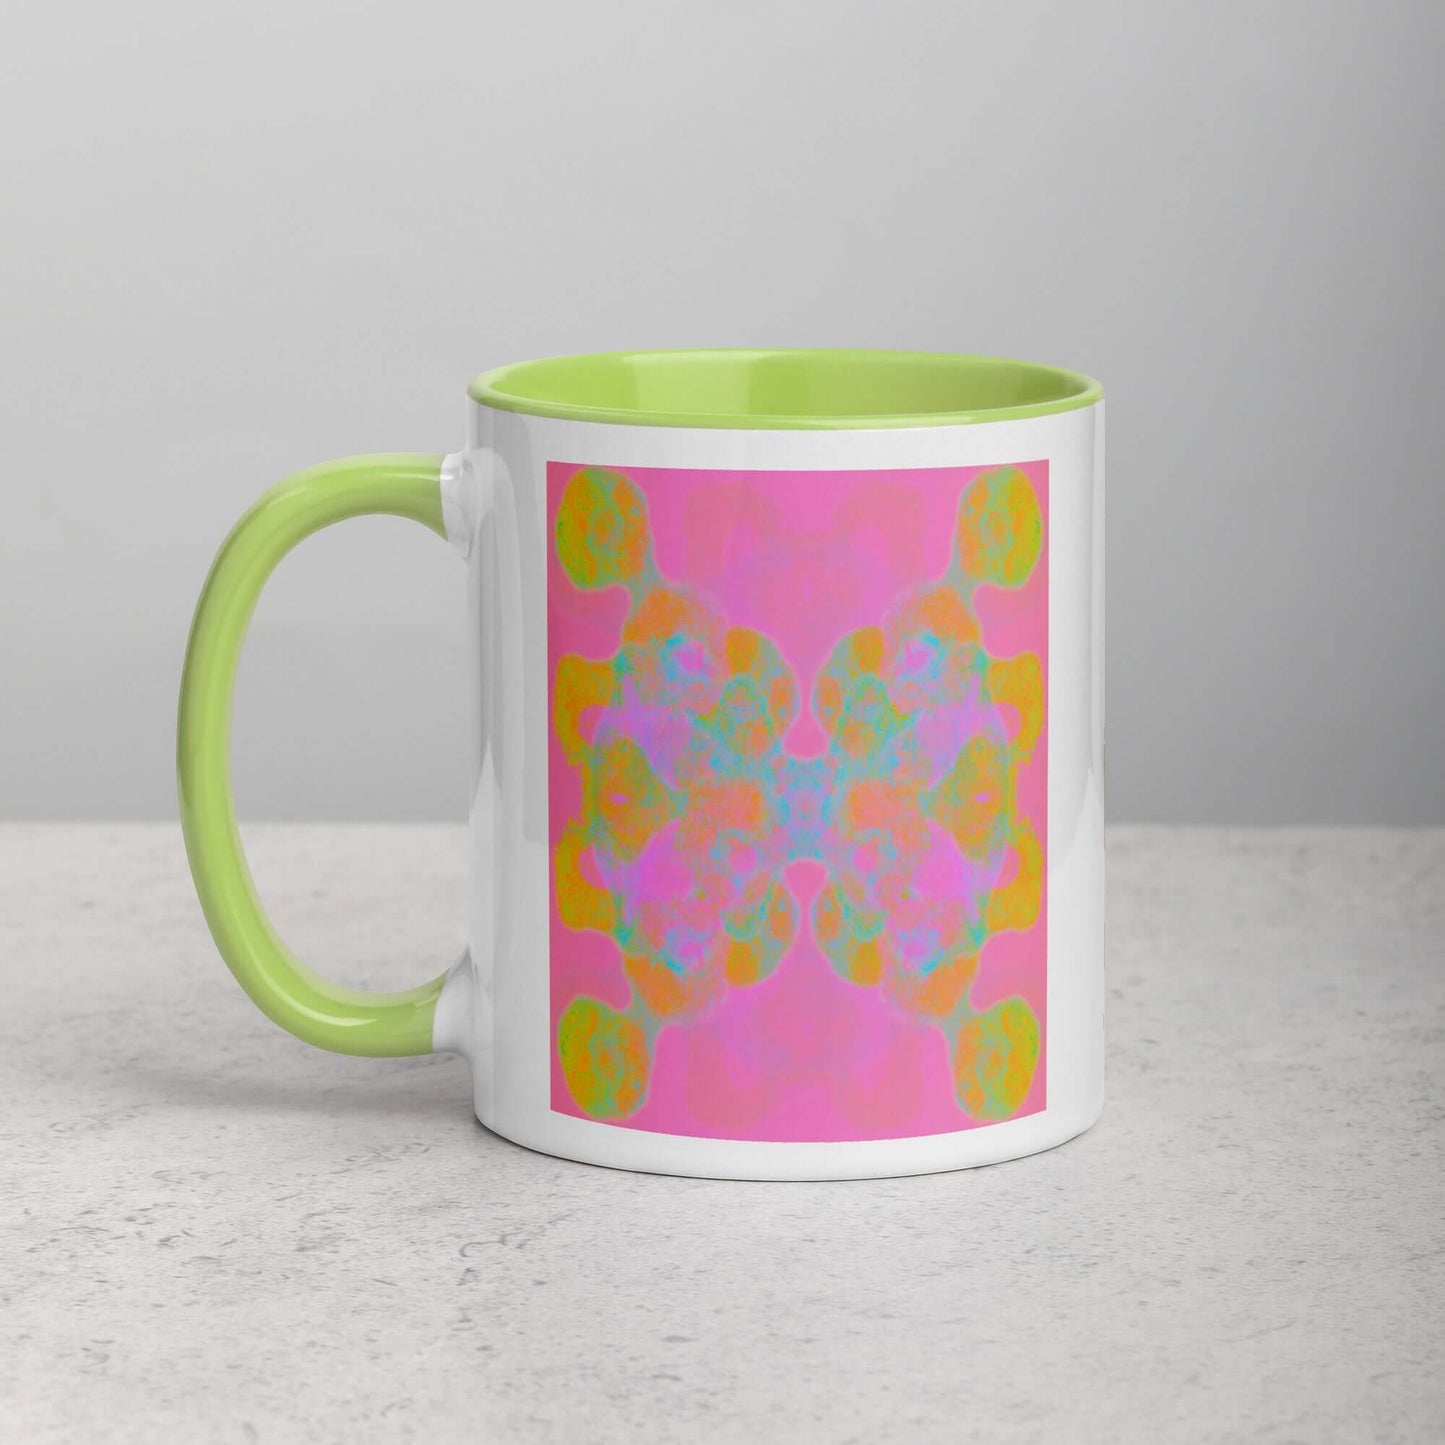 Colorful Abstract Butterfly Shape on Pink Background “Double the Fun” Abstract Art Mug with Lime Green Color Inside Left Handed Front View